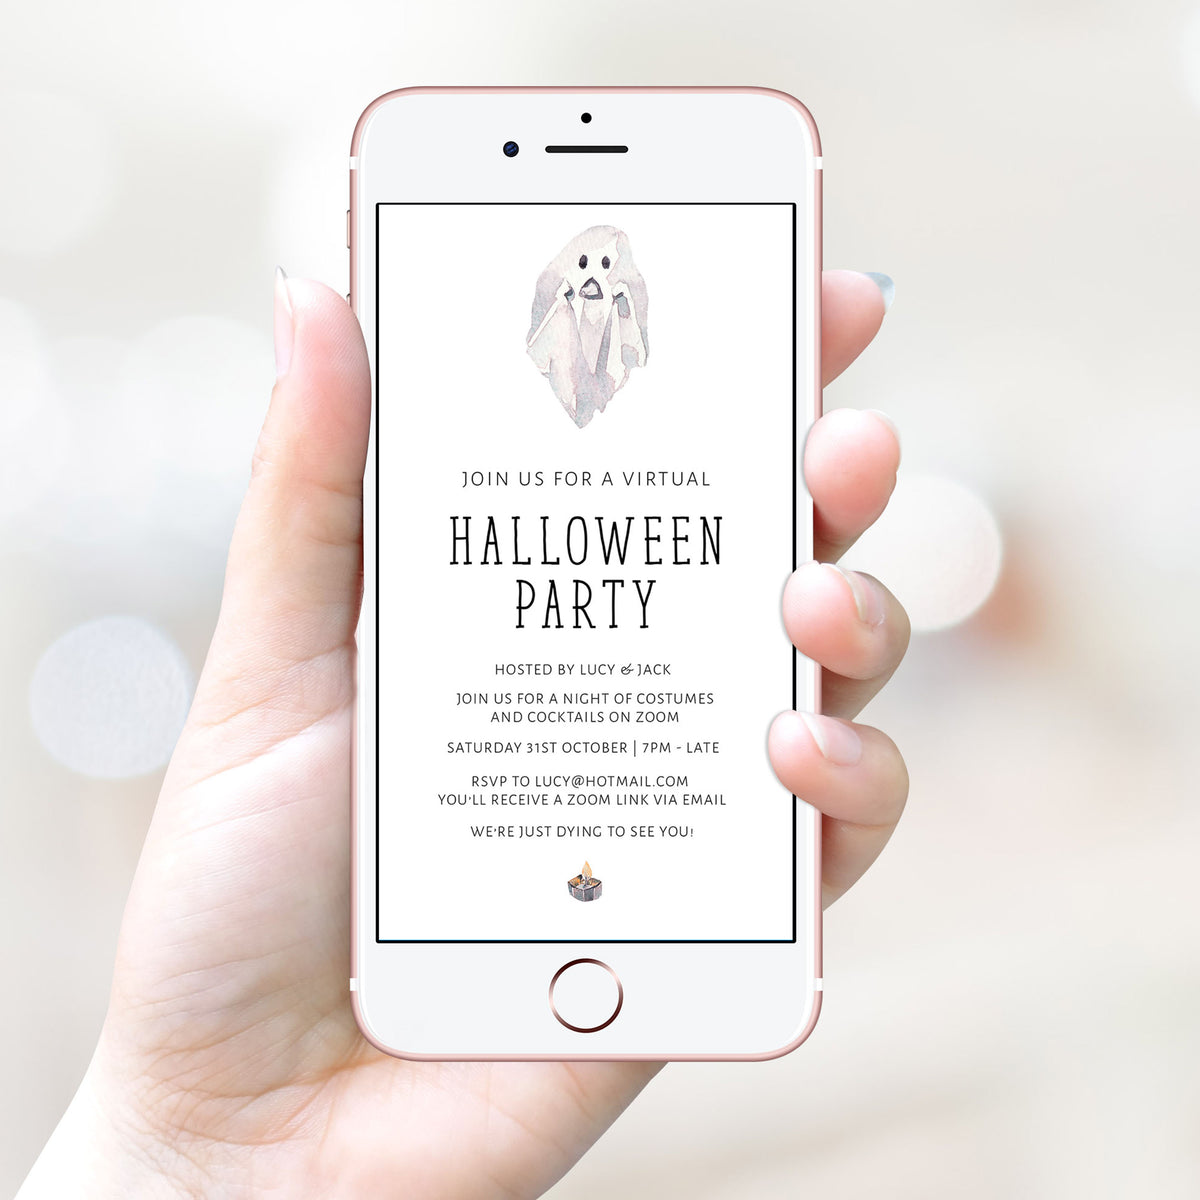 virtual halloween invitation, halloween invitations, editable halloween invitations, cell phone halloween invitations, spooky halloween invitations, drink up witches